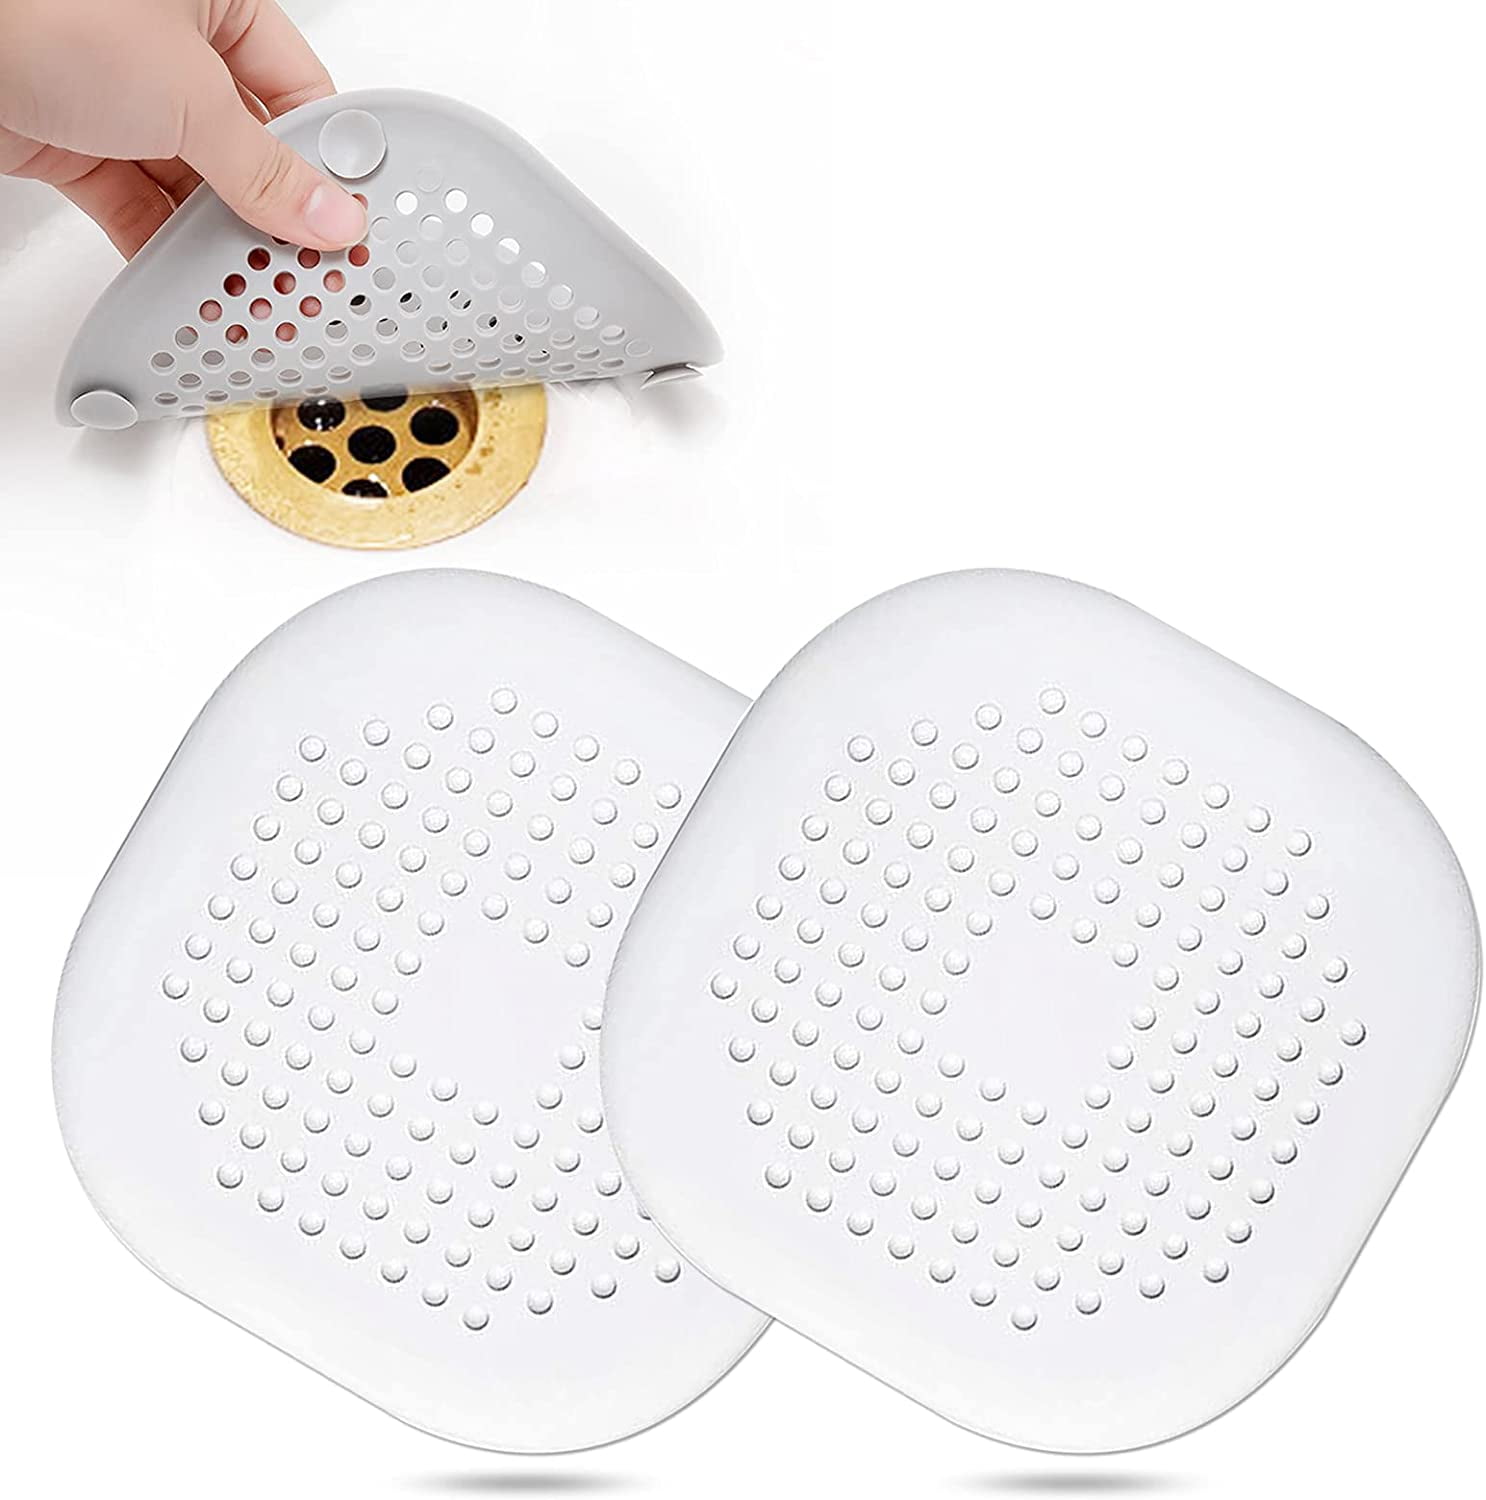 Silicone Sink Strainer with Suction Hair Trap Waste Catcher Washable UK